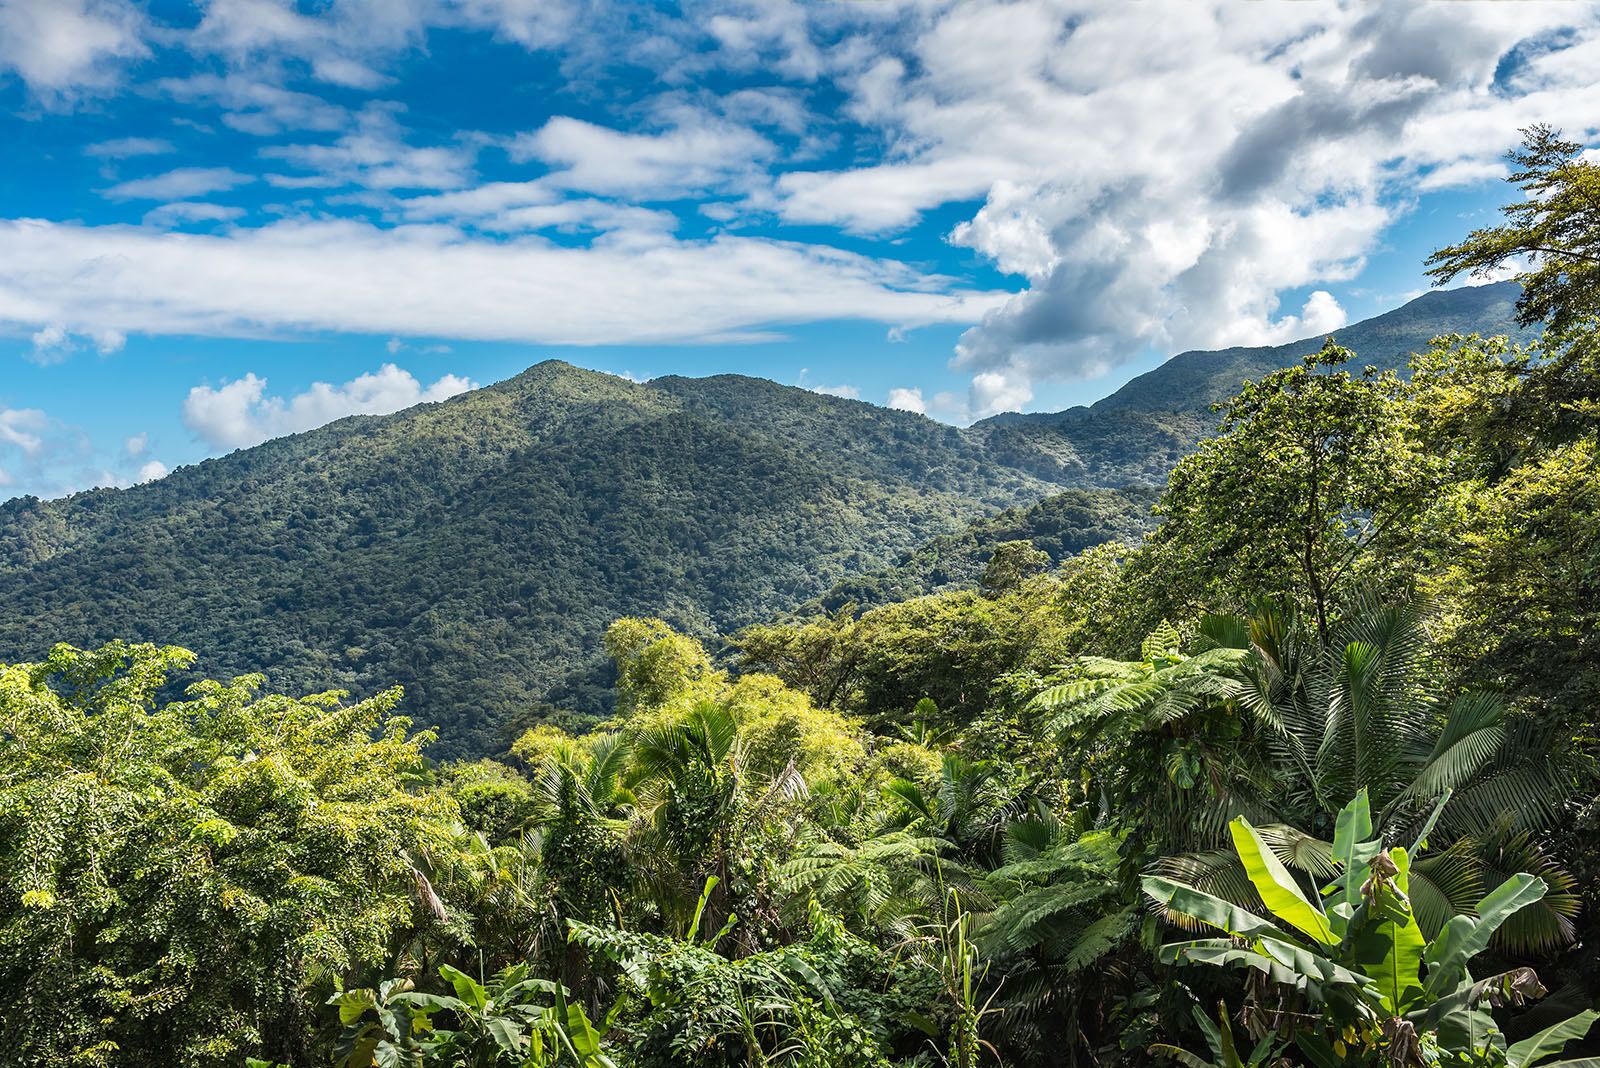 A tropical forest with a mountain in the background.